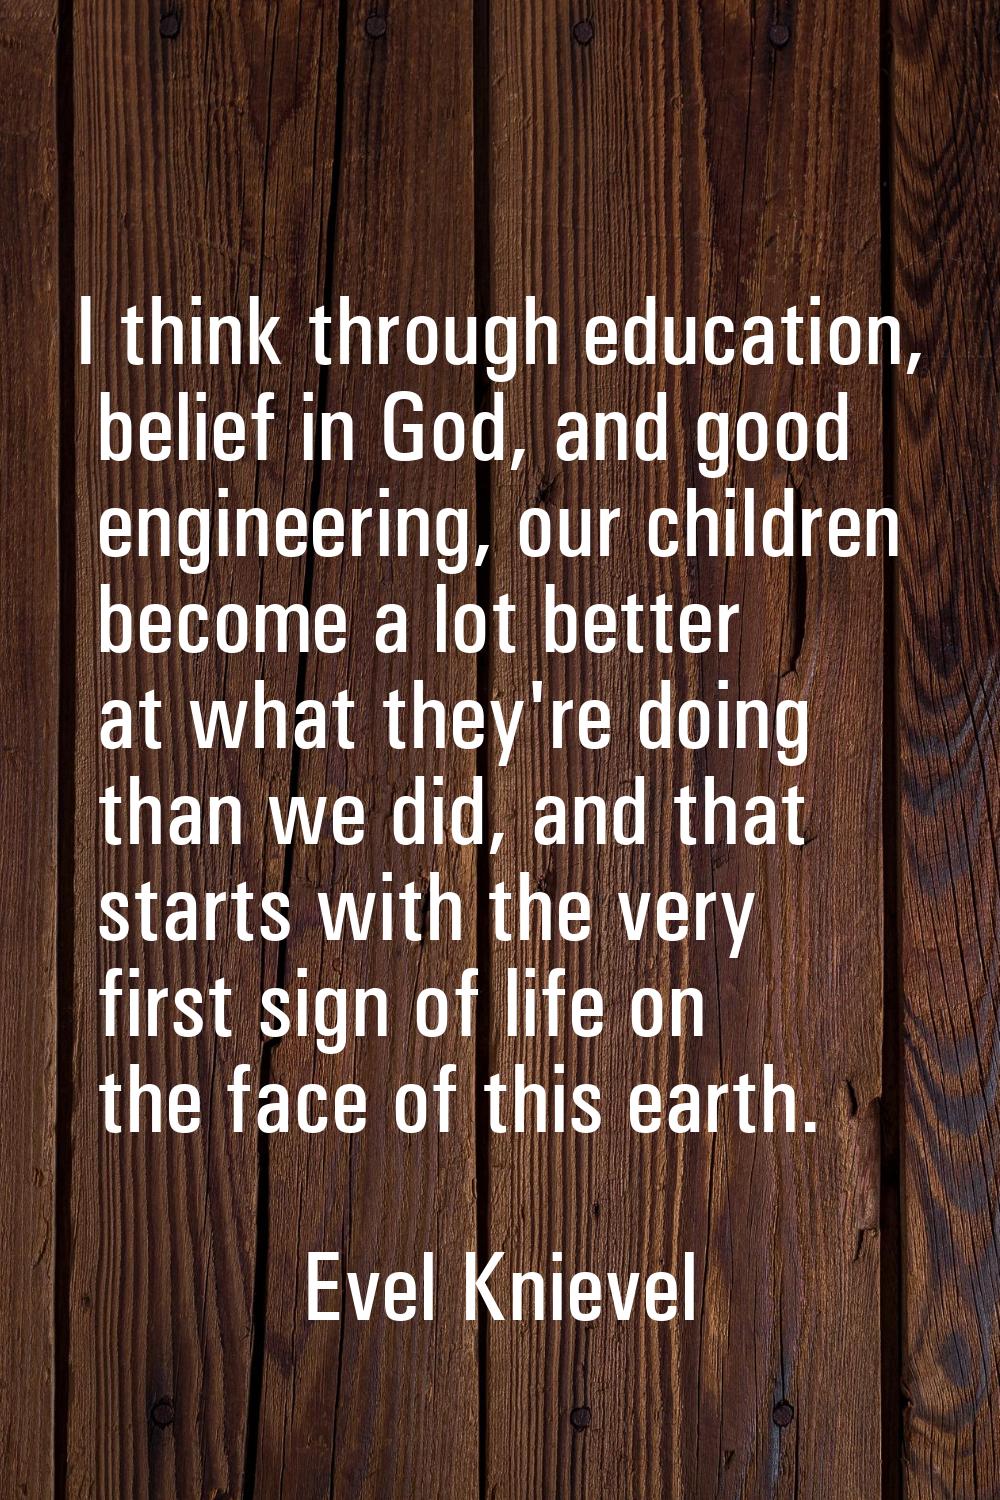 I think through education, belief in God, and good engineering, our children become a lot better at